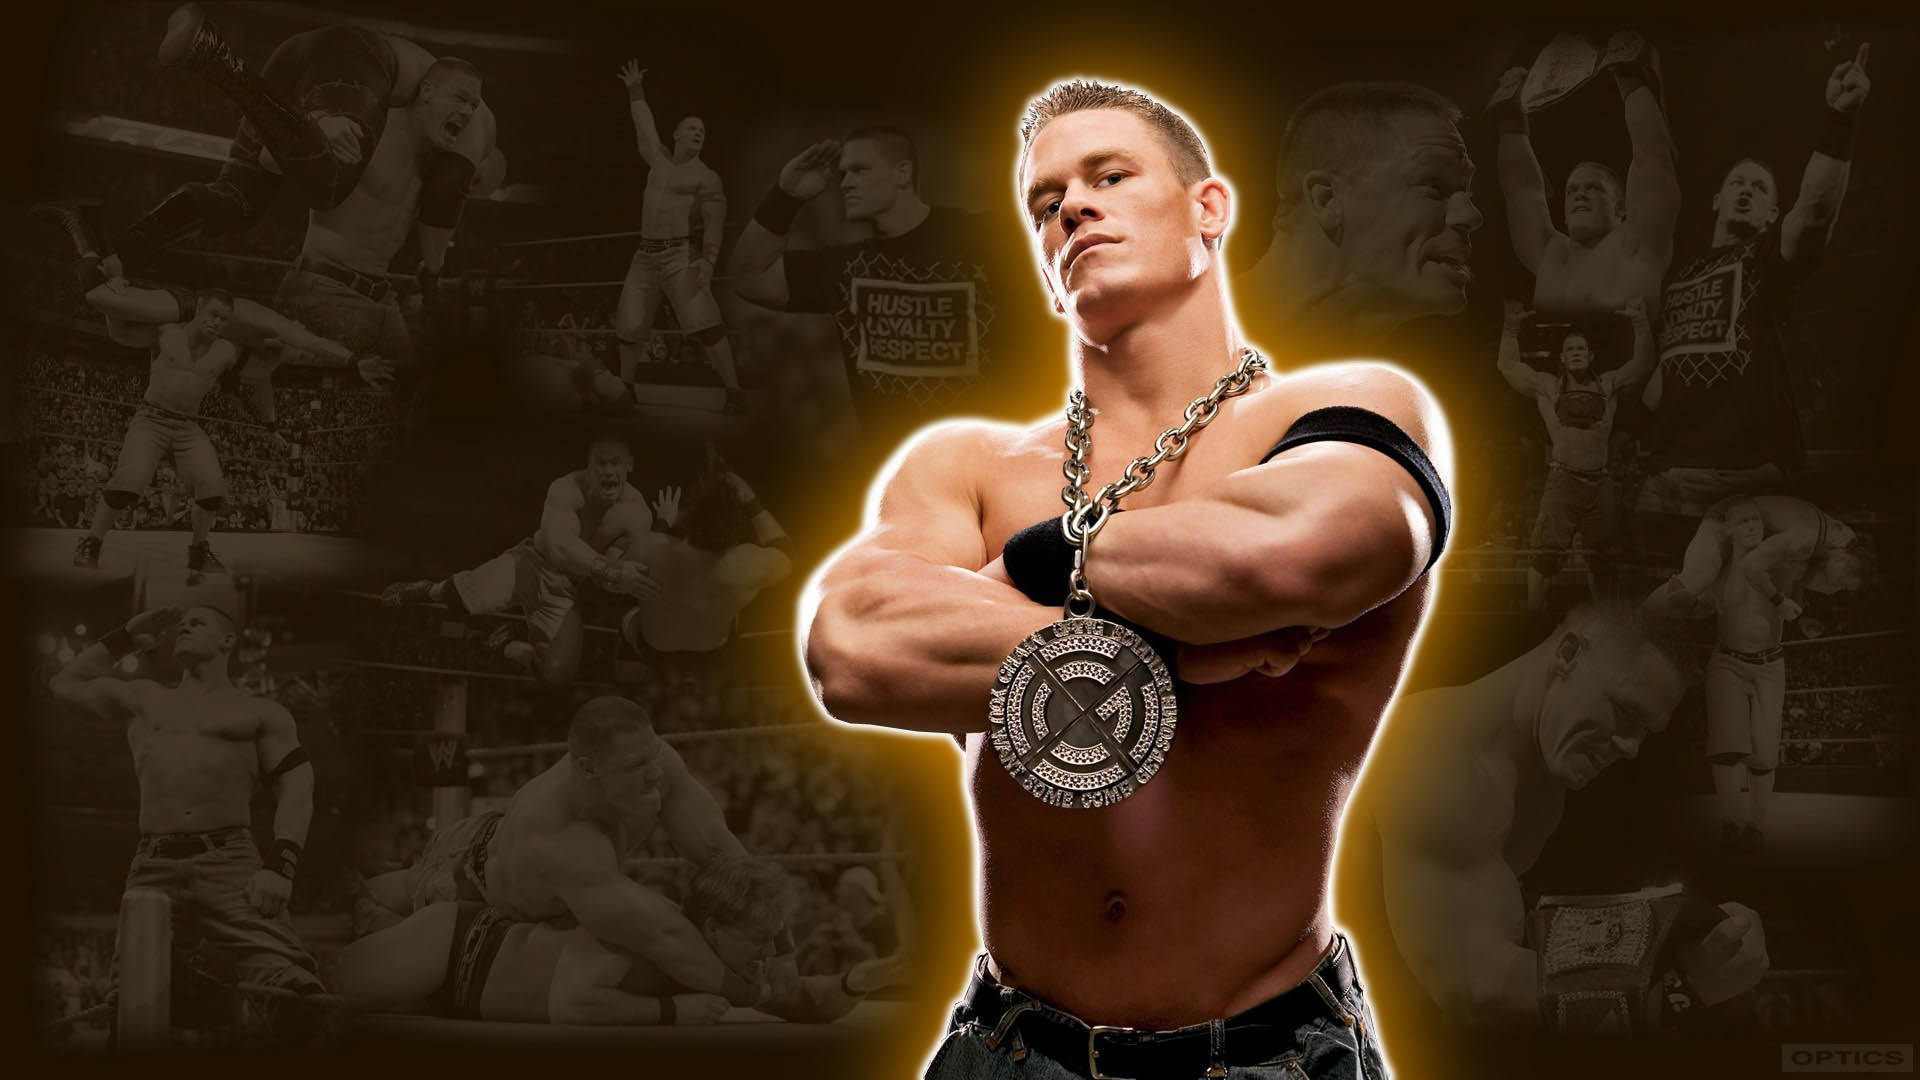 Free download 30 WWE John Cena wallpapers HD free Download 2016 [1920x1080]  for your Desktop, Mobile & Tablet | Explore 58+ John Cena Wallpaper 2015  For Desktop | John Cena 2015 Wallpapers,